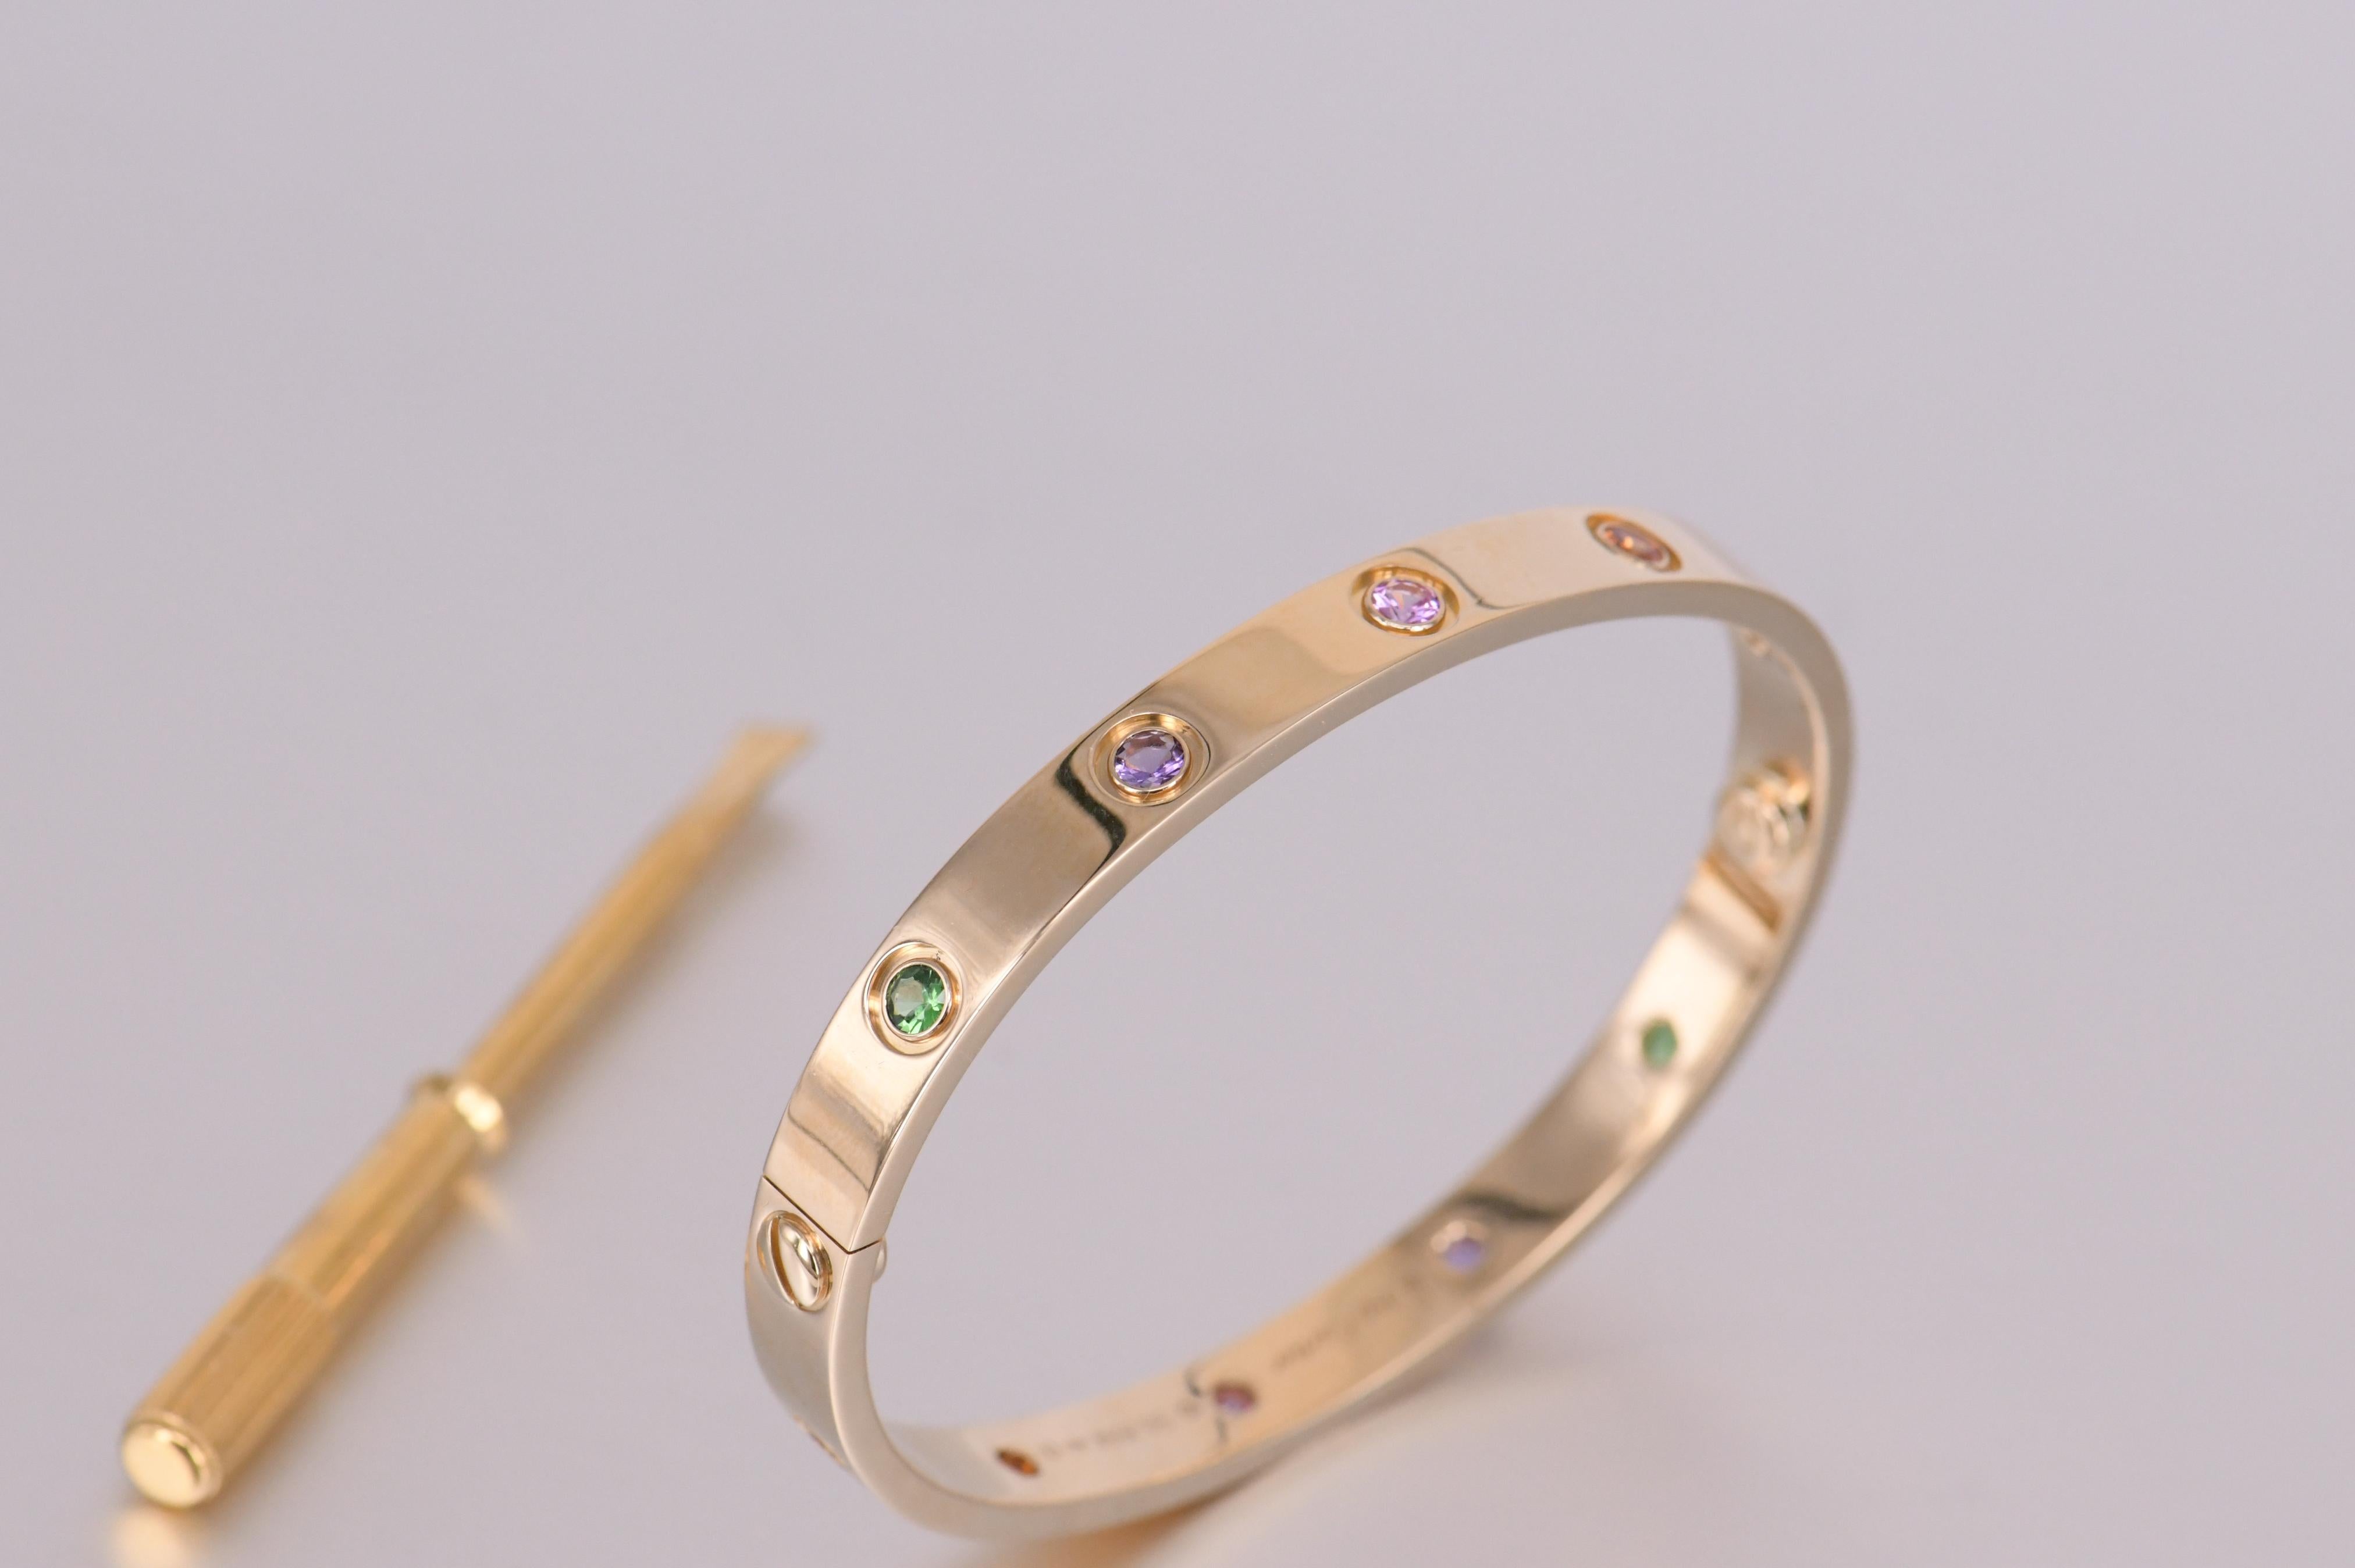 LOVE bracelet, 18K yellow gold, set with 2 pink sapphires, 2 yellow sapphires, 2 green garnets, 2 orange garnets, and 2 amethysts. Comes with a screwdriver and Dandelion Antiques presentation box    

__________________________________

Dandelion